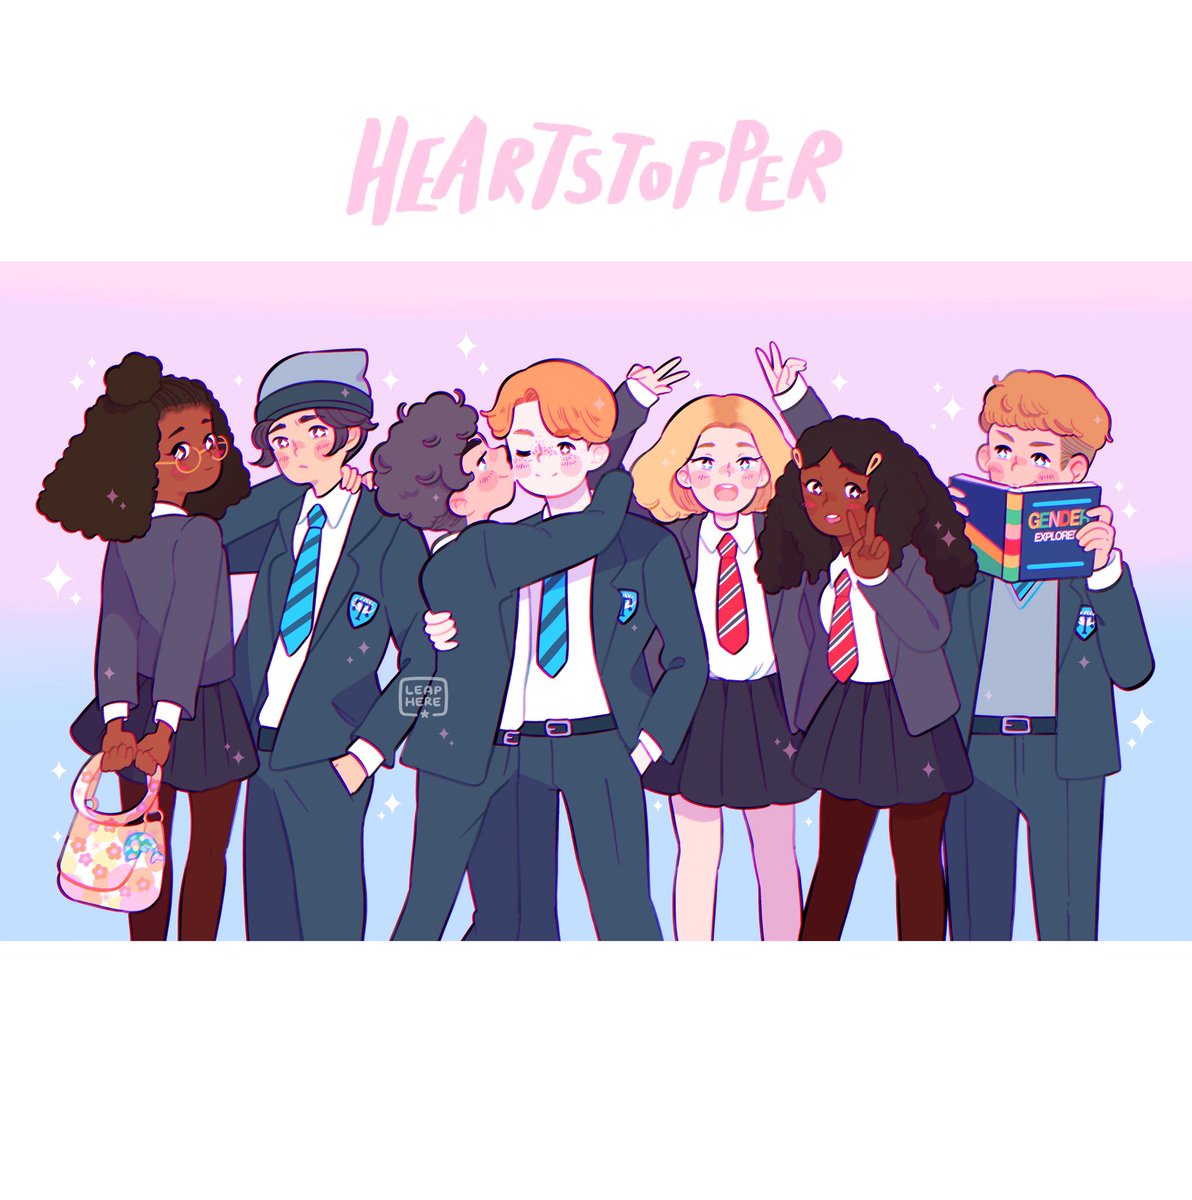 「🌈Colours of You🌈
#HeartstopperNetflix 」|✧ Leaphereのイラスト